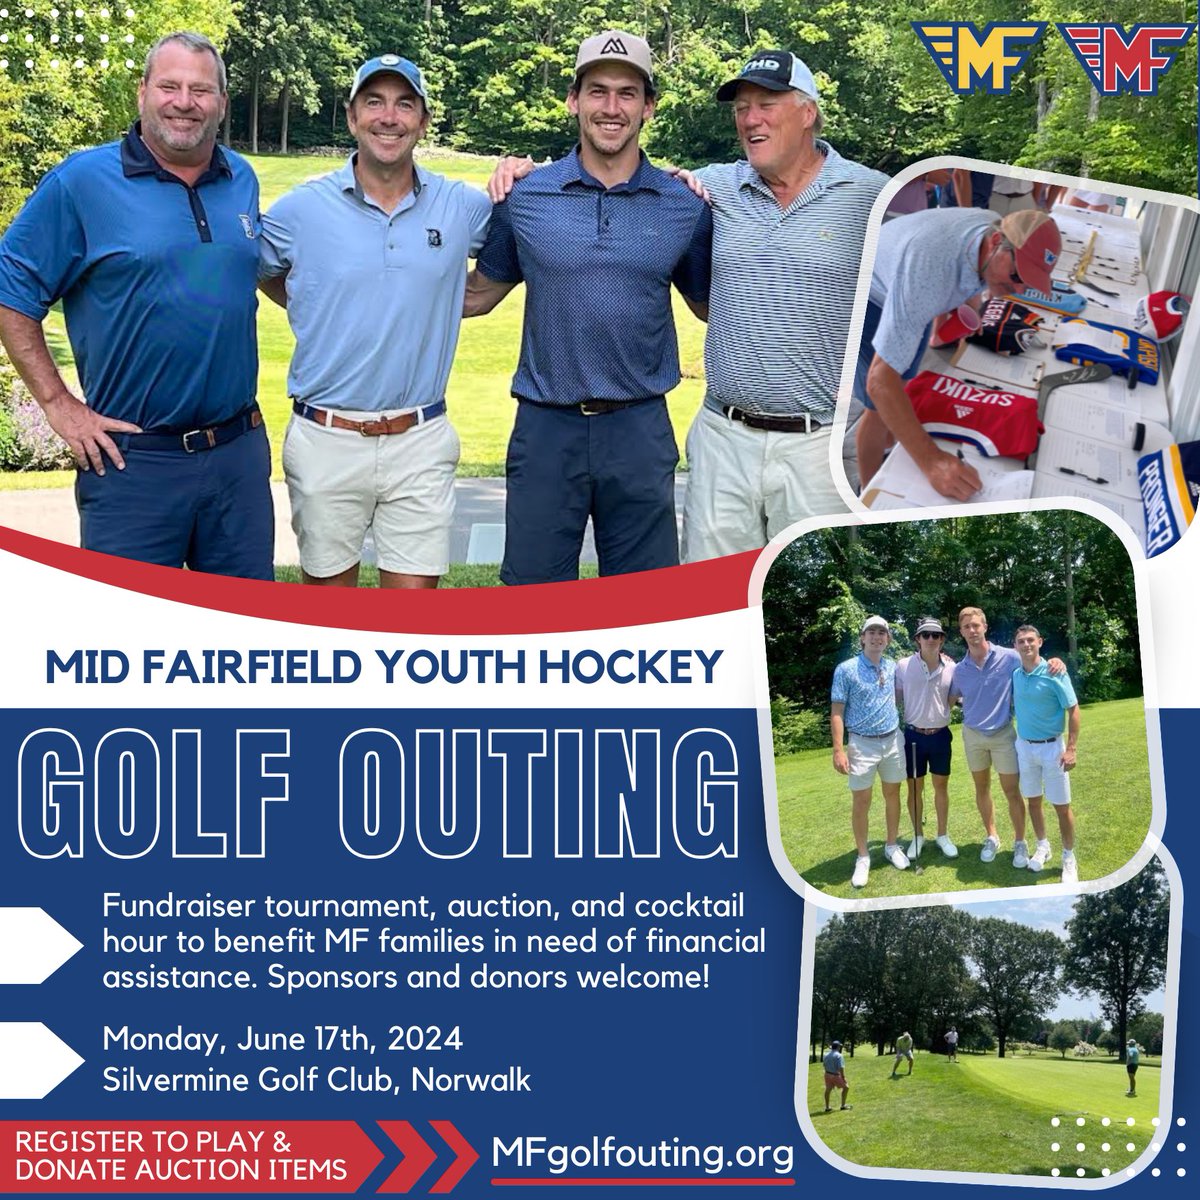 The 2nd Annual Mid Fairfield Hockey Golf Outing is coming up! Go to MFgolfouting.org to register as a single player or foursome, donate, or sponsor a hole. Email Alicia 📧 MFGolf2023@gmail.com if you wish to contribute auction items